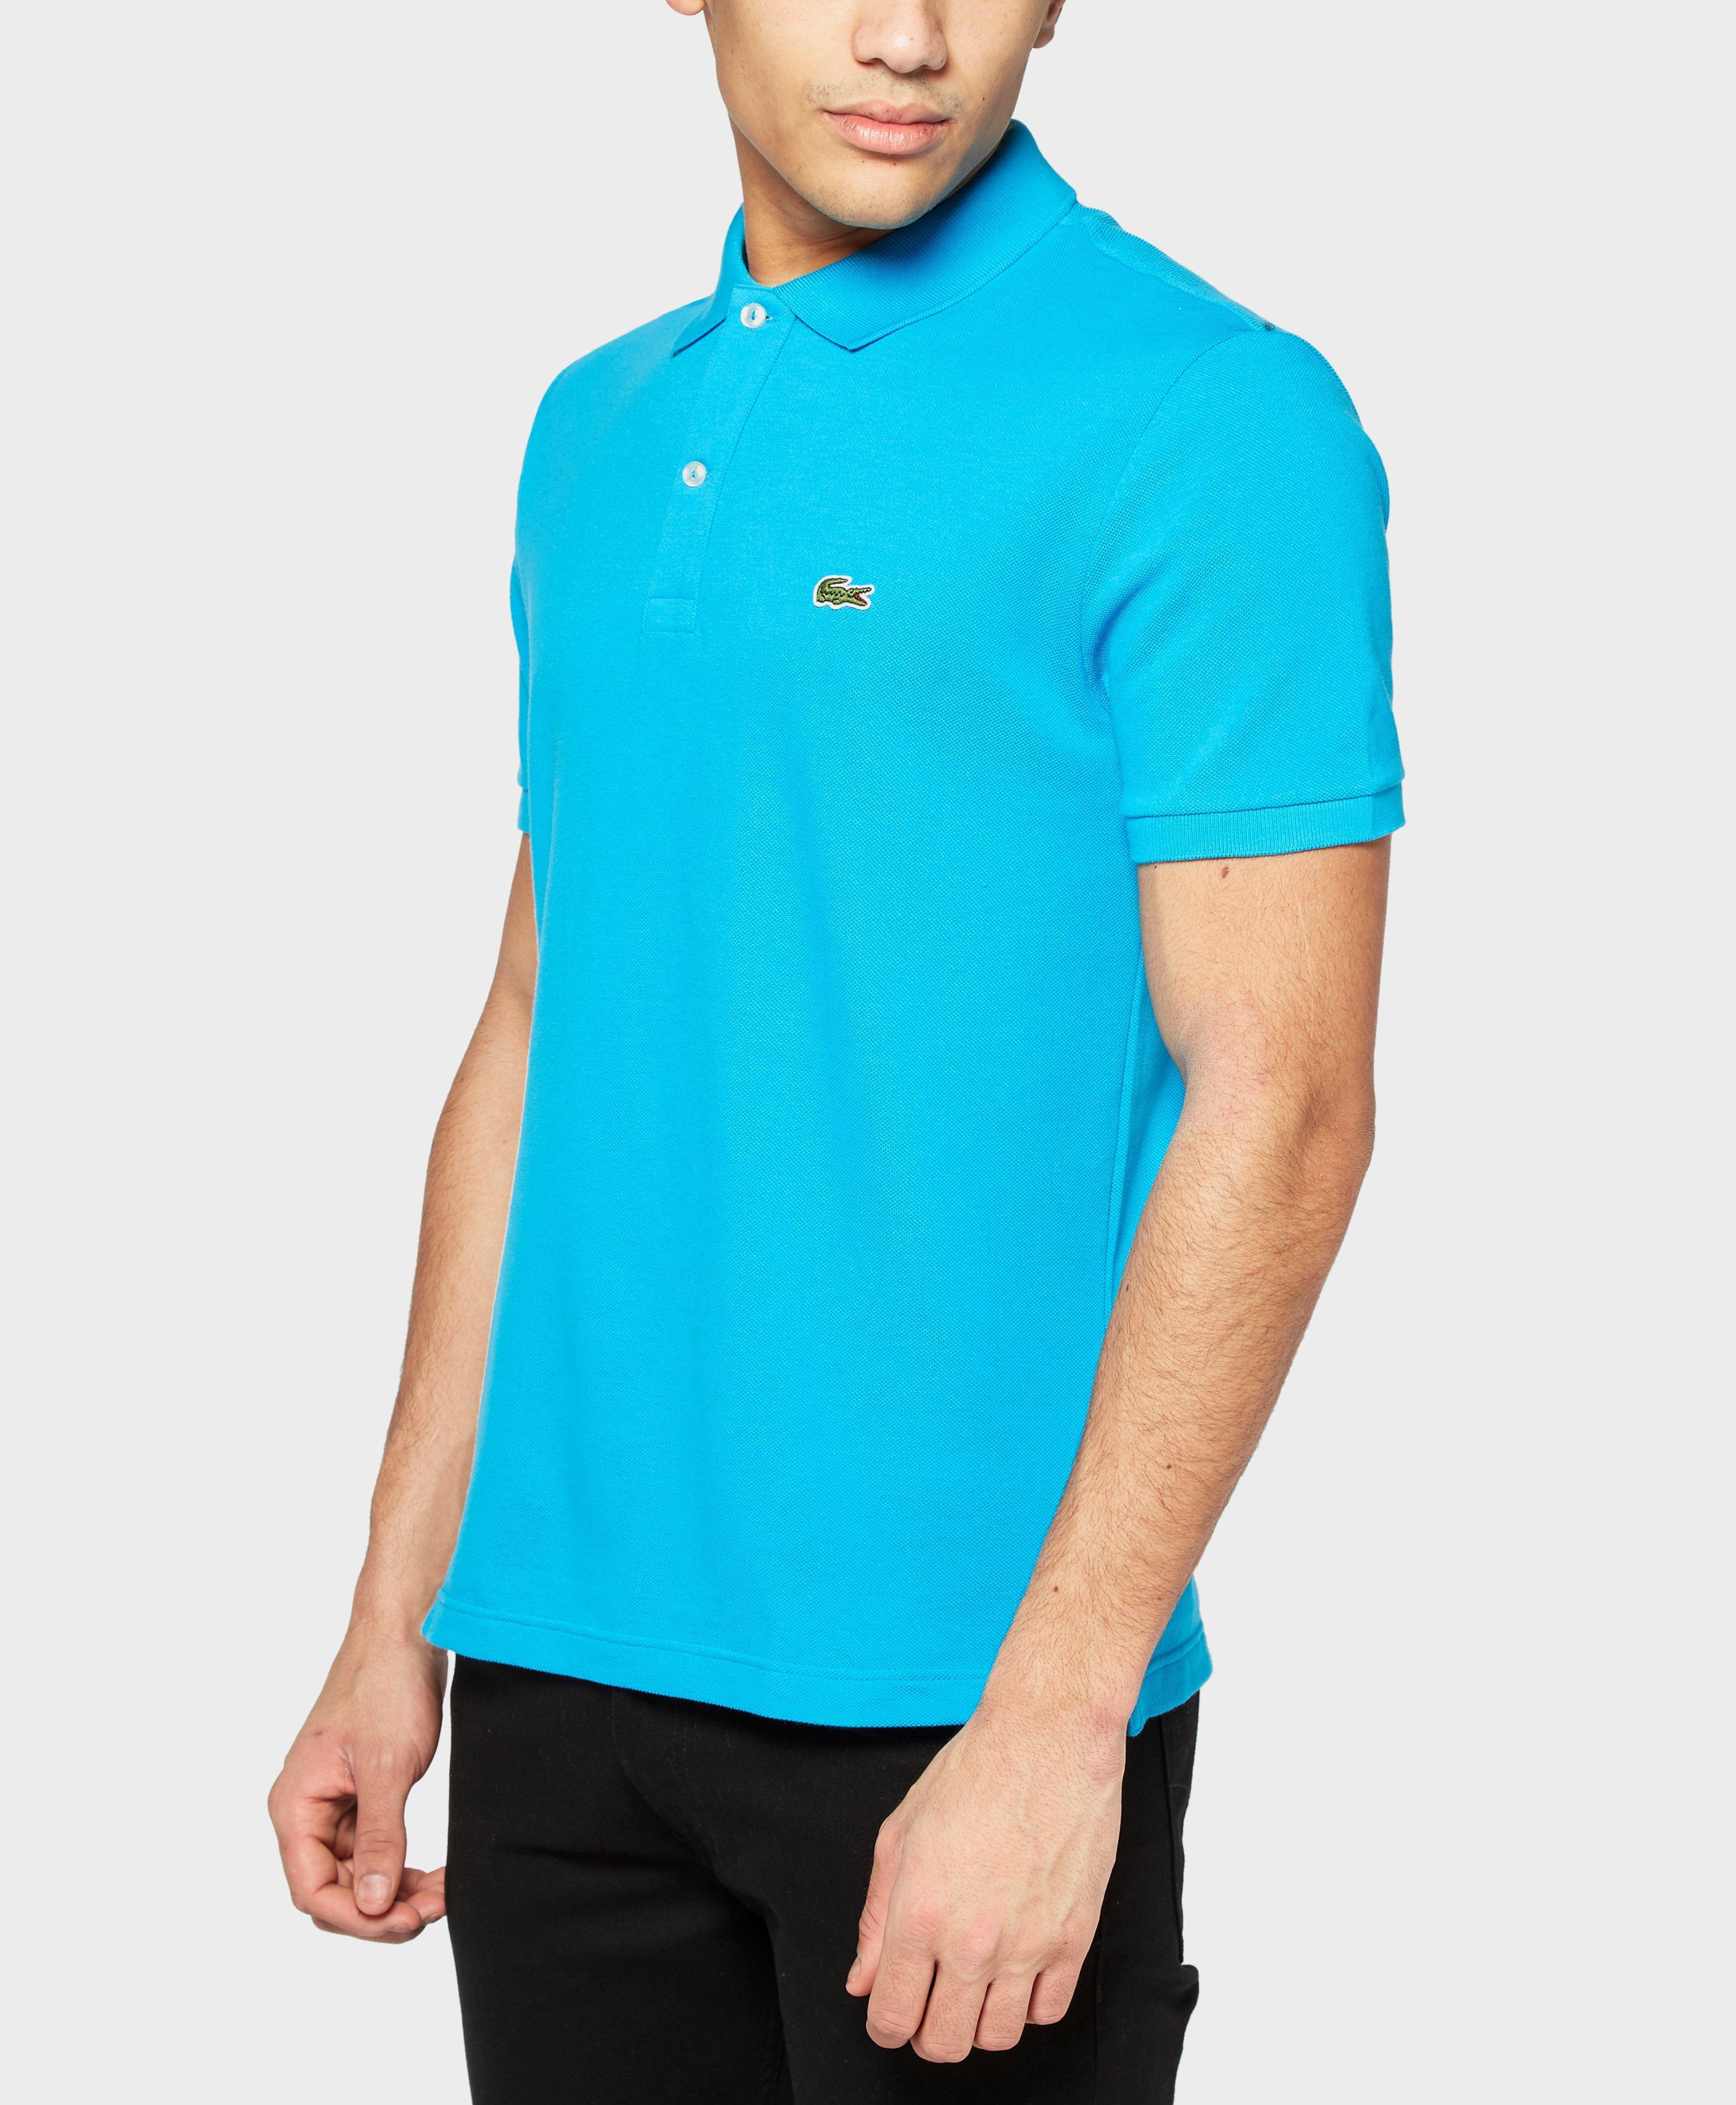 Lyst - Lacoste Slim Fit Polo Shirt in Blue for Men